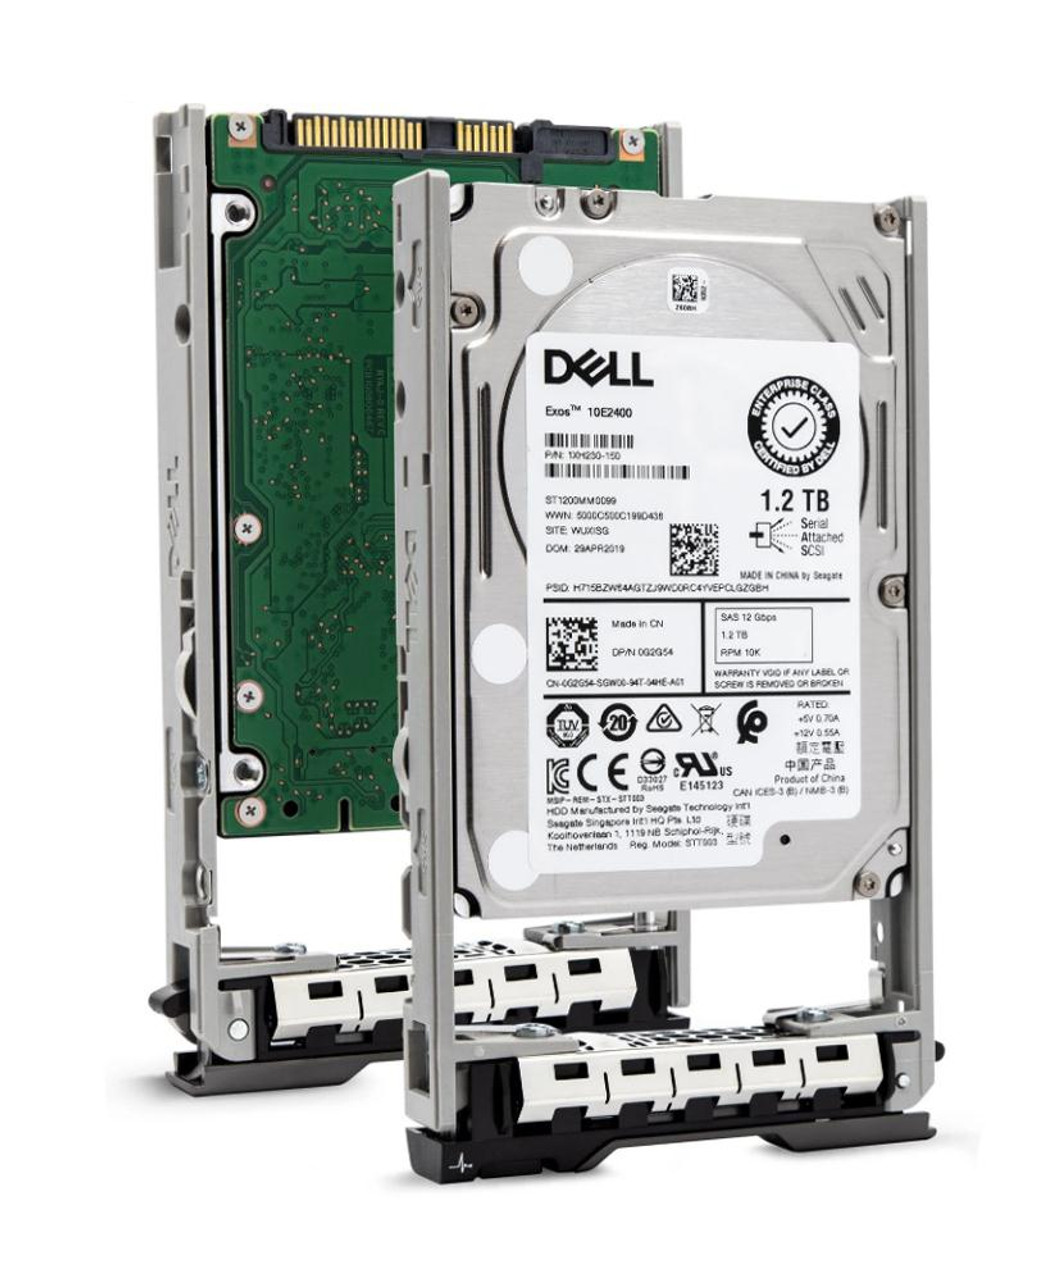 4RY5N Dell 1.2TB 10000RPM SAS 12Gbps 2.5-inch Internal Hard Drive Drives with Tray PowerEdge Server G13